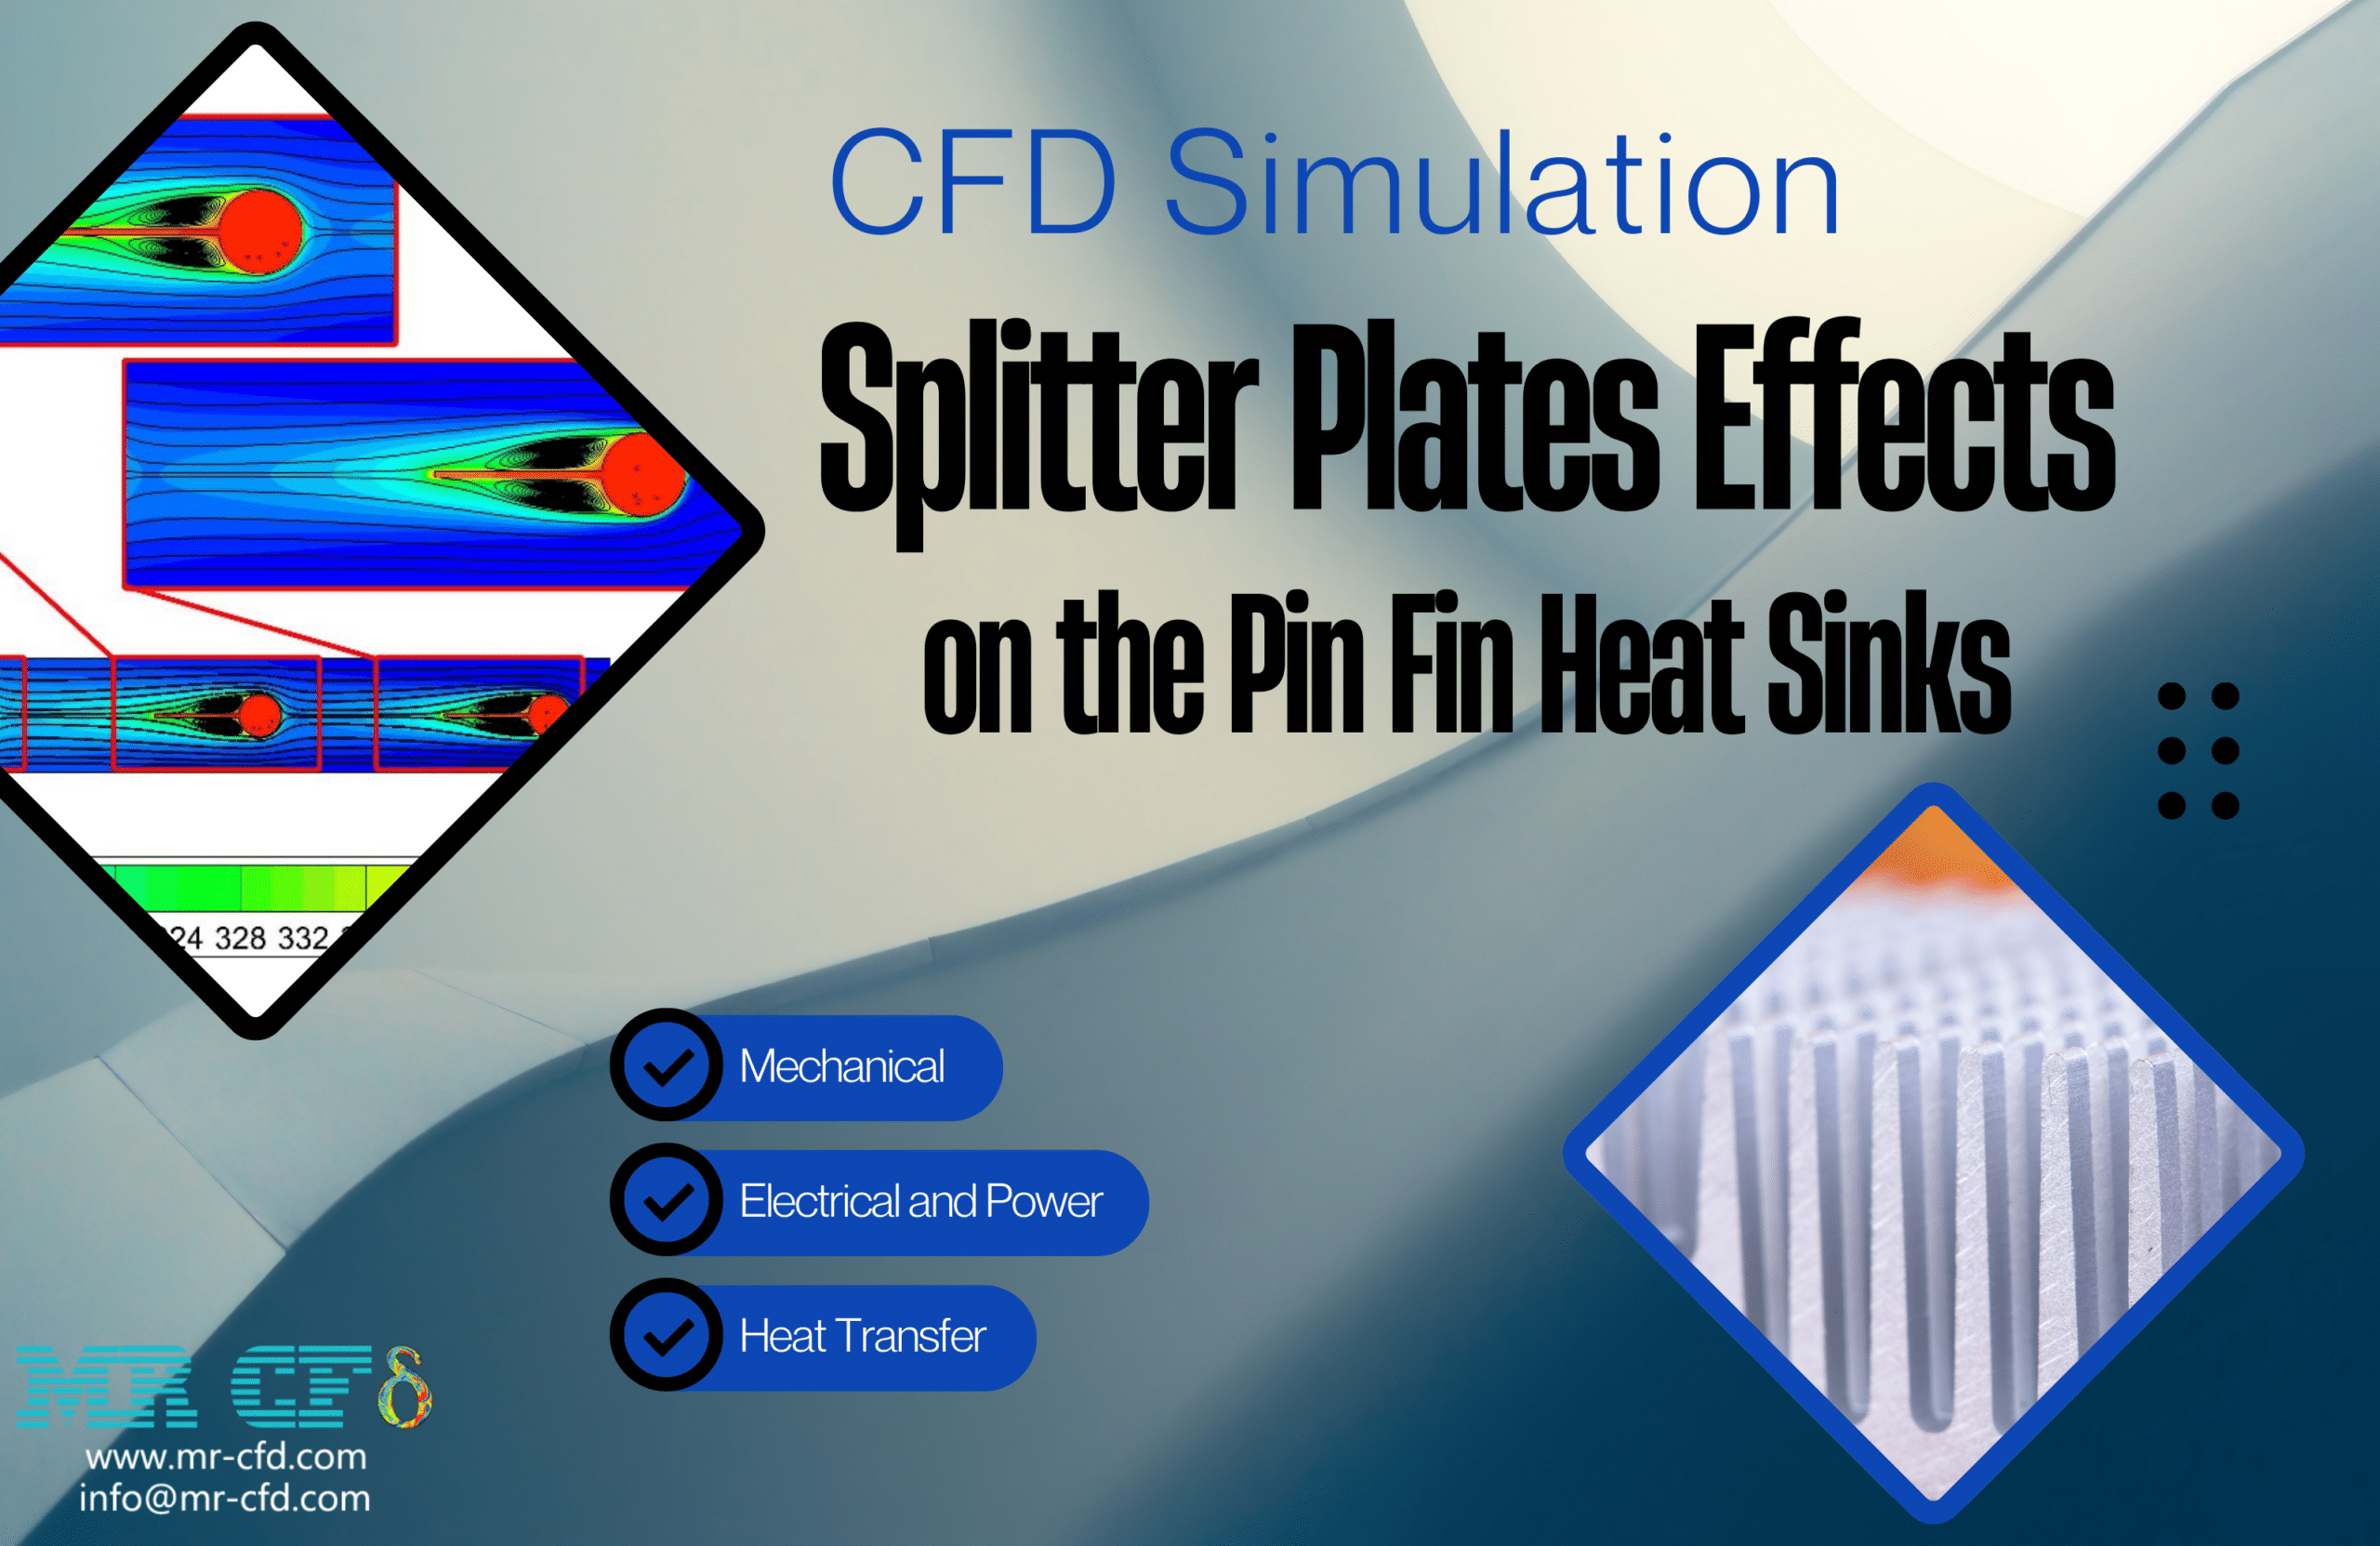 Splitter Plates Effects on the Pin Fin Heat Sinks CFD Simulation